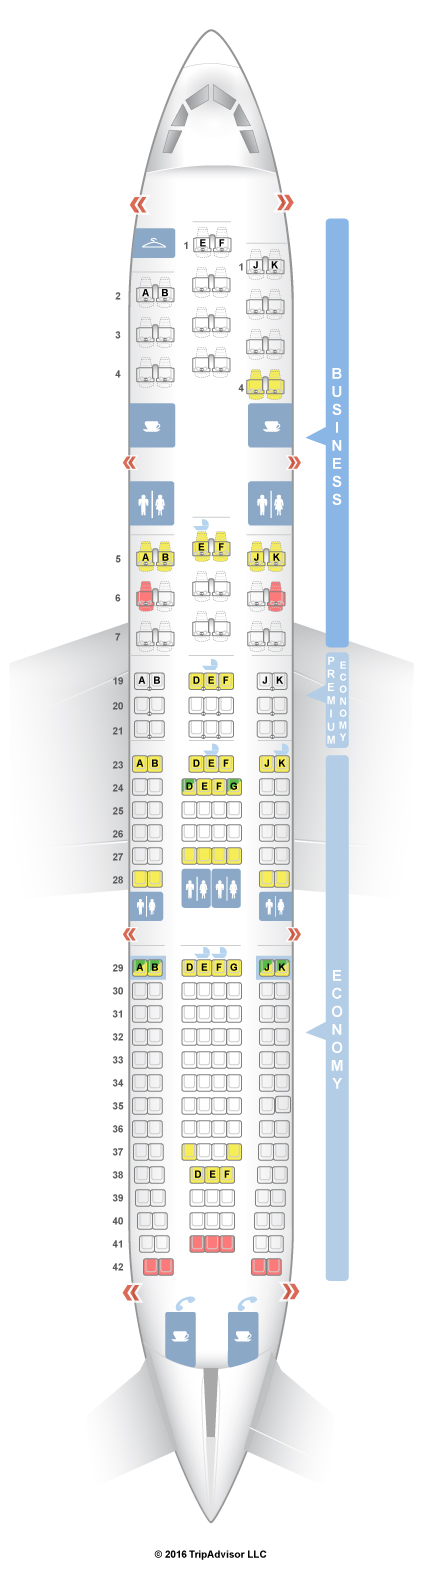 Delta Airbus Seating Chart